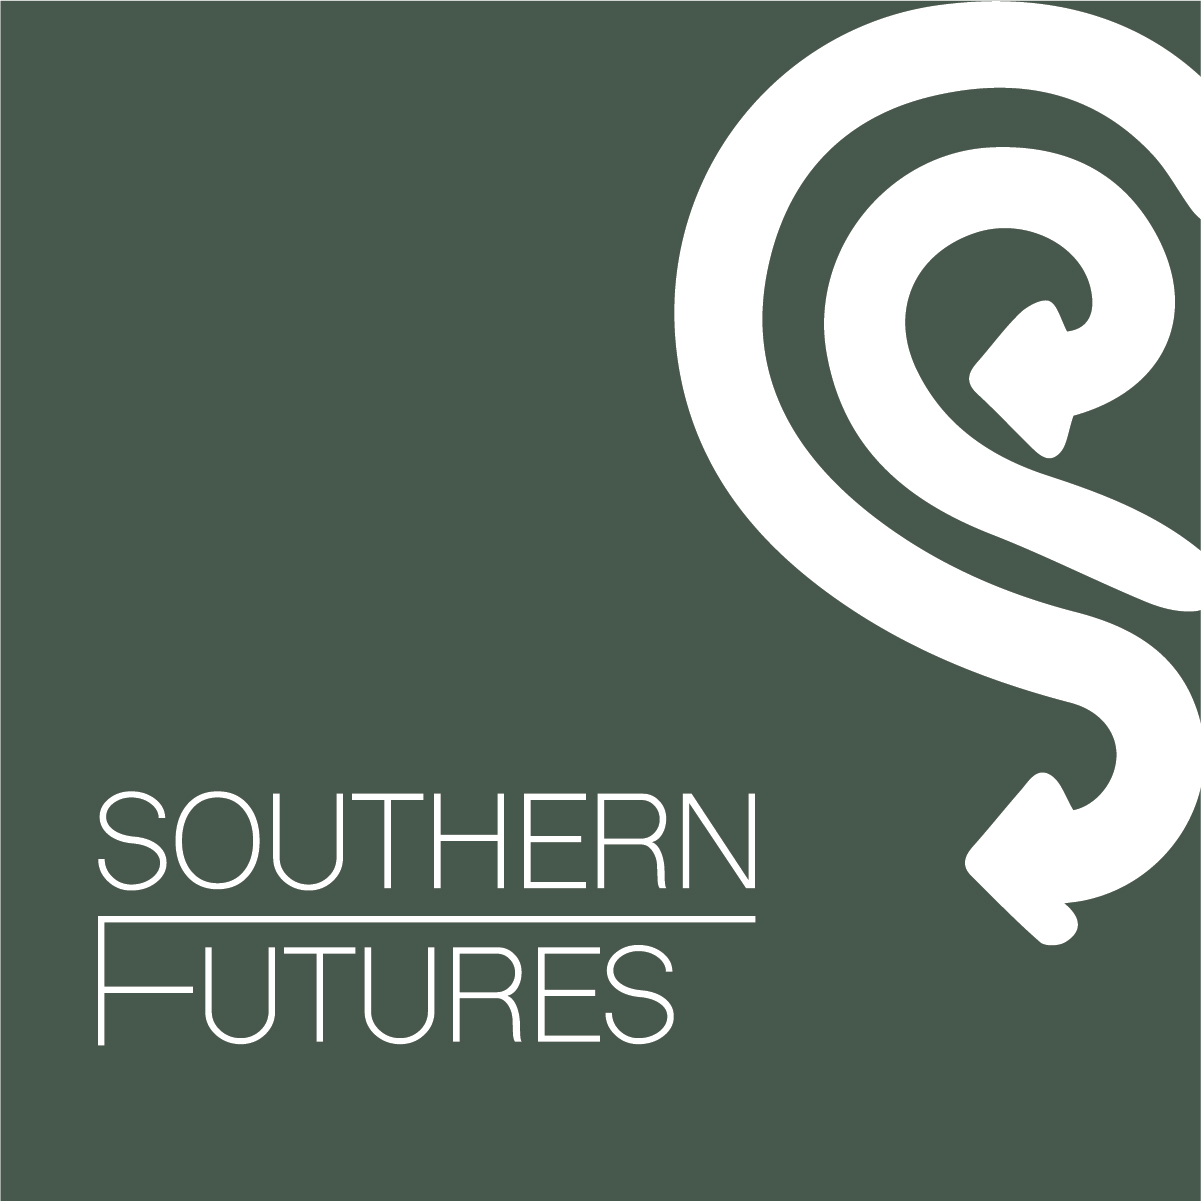 The Southern Futures logo features the word "Southern" above and connected to the word "Futures" below with a swirly series of arrows connected in the top right corner.